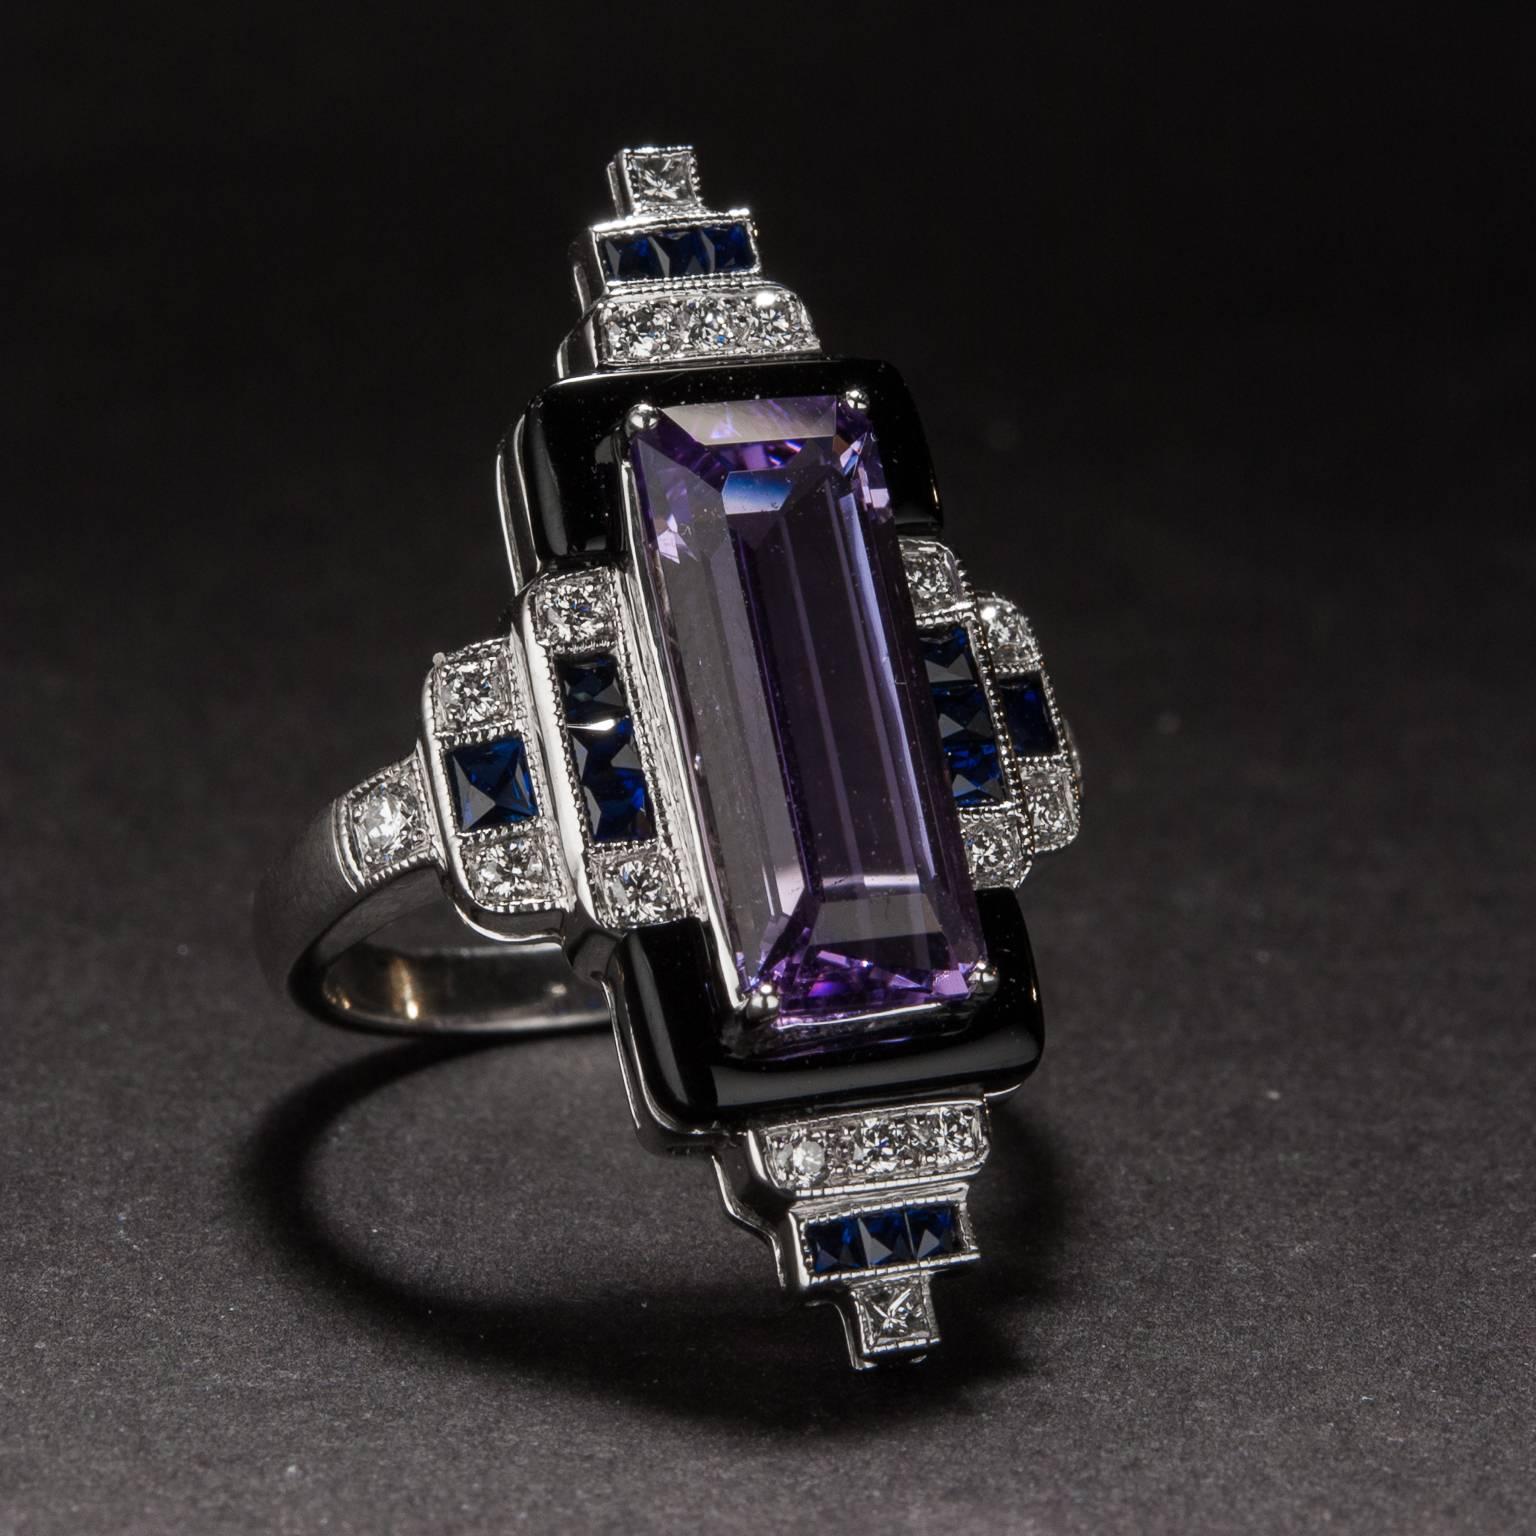 An exceptional Art Deco style ring with a lovely 3.11 carat center amethyst. The center stone is accented by onyx as well as .79 total carats of sapphire and .25 total carats of diamond. The striking and angular mounting is crafted in platinum and